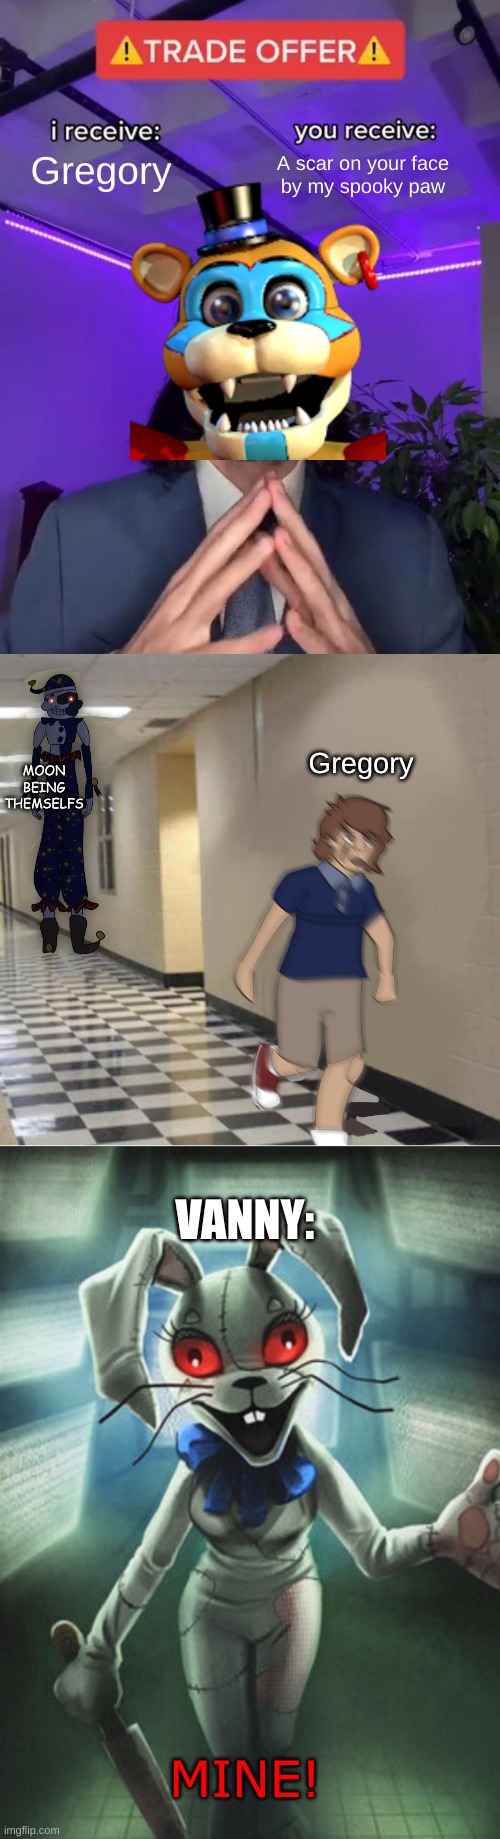 gregory is tired of runnin' | Gregory; A scar on your face
by my spooky paw; MOON BEING
THEMSELFS; Gregory; VANNY:; MINE! | image tagged in trade offer,moon chasing gregory,vanny | made w/ Imgflip meme maker